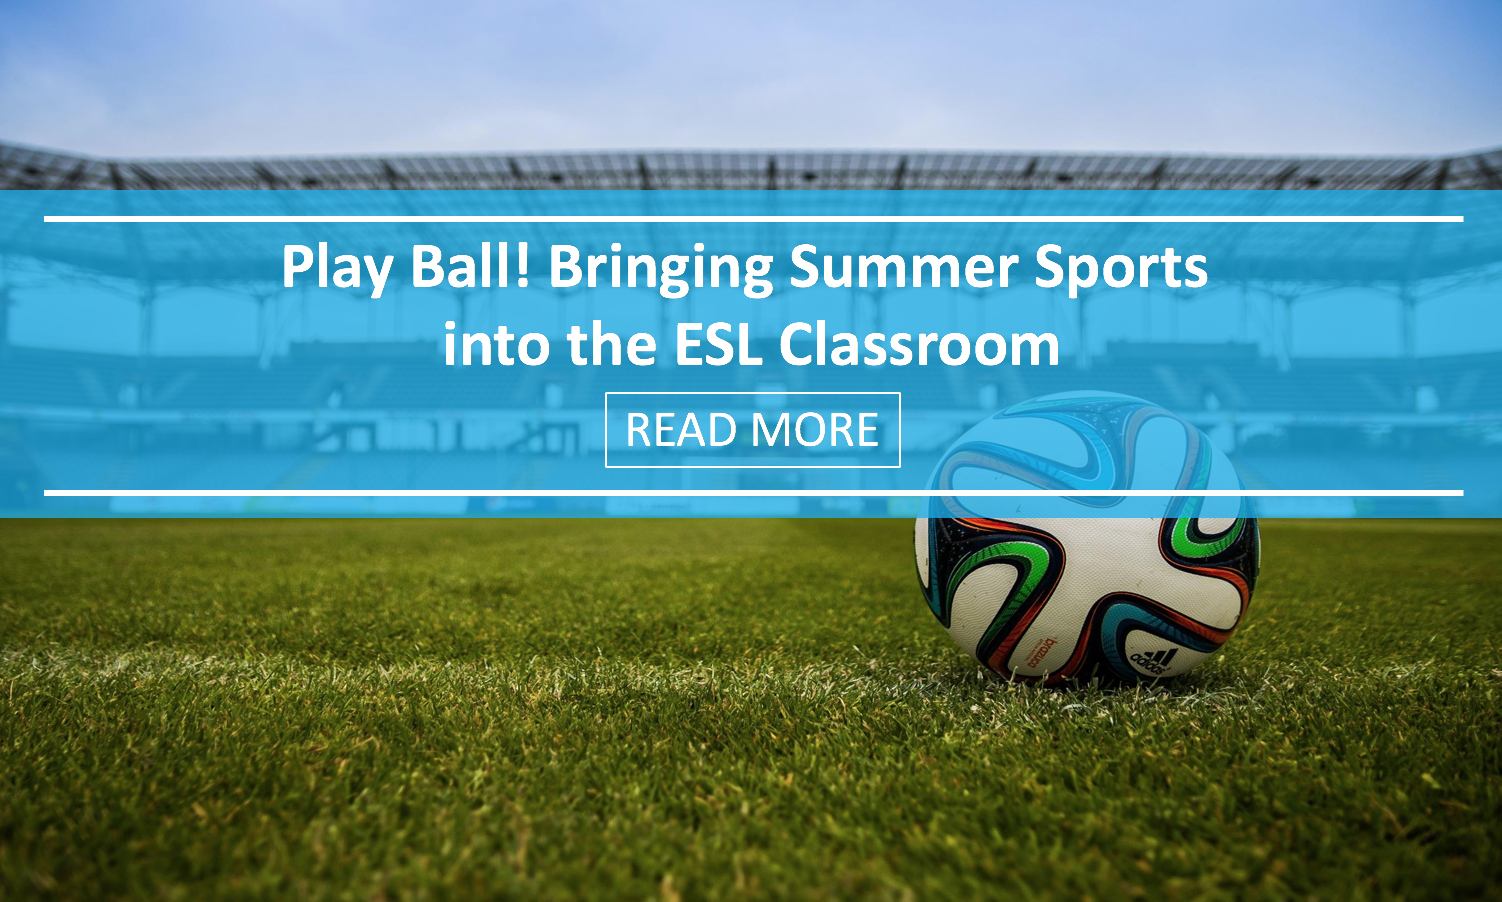 Play Ball! Bringing Summer Sports into the ESL Classroom